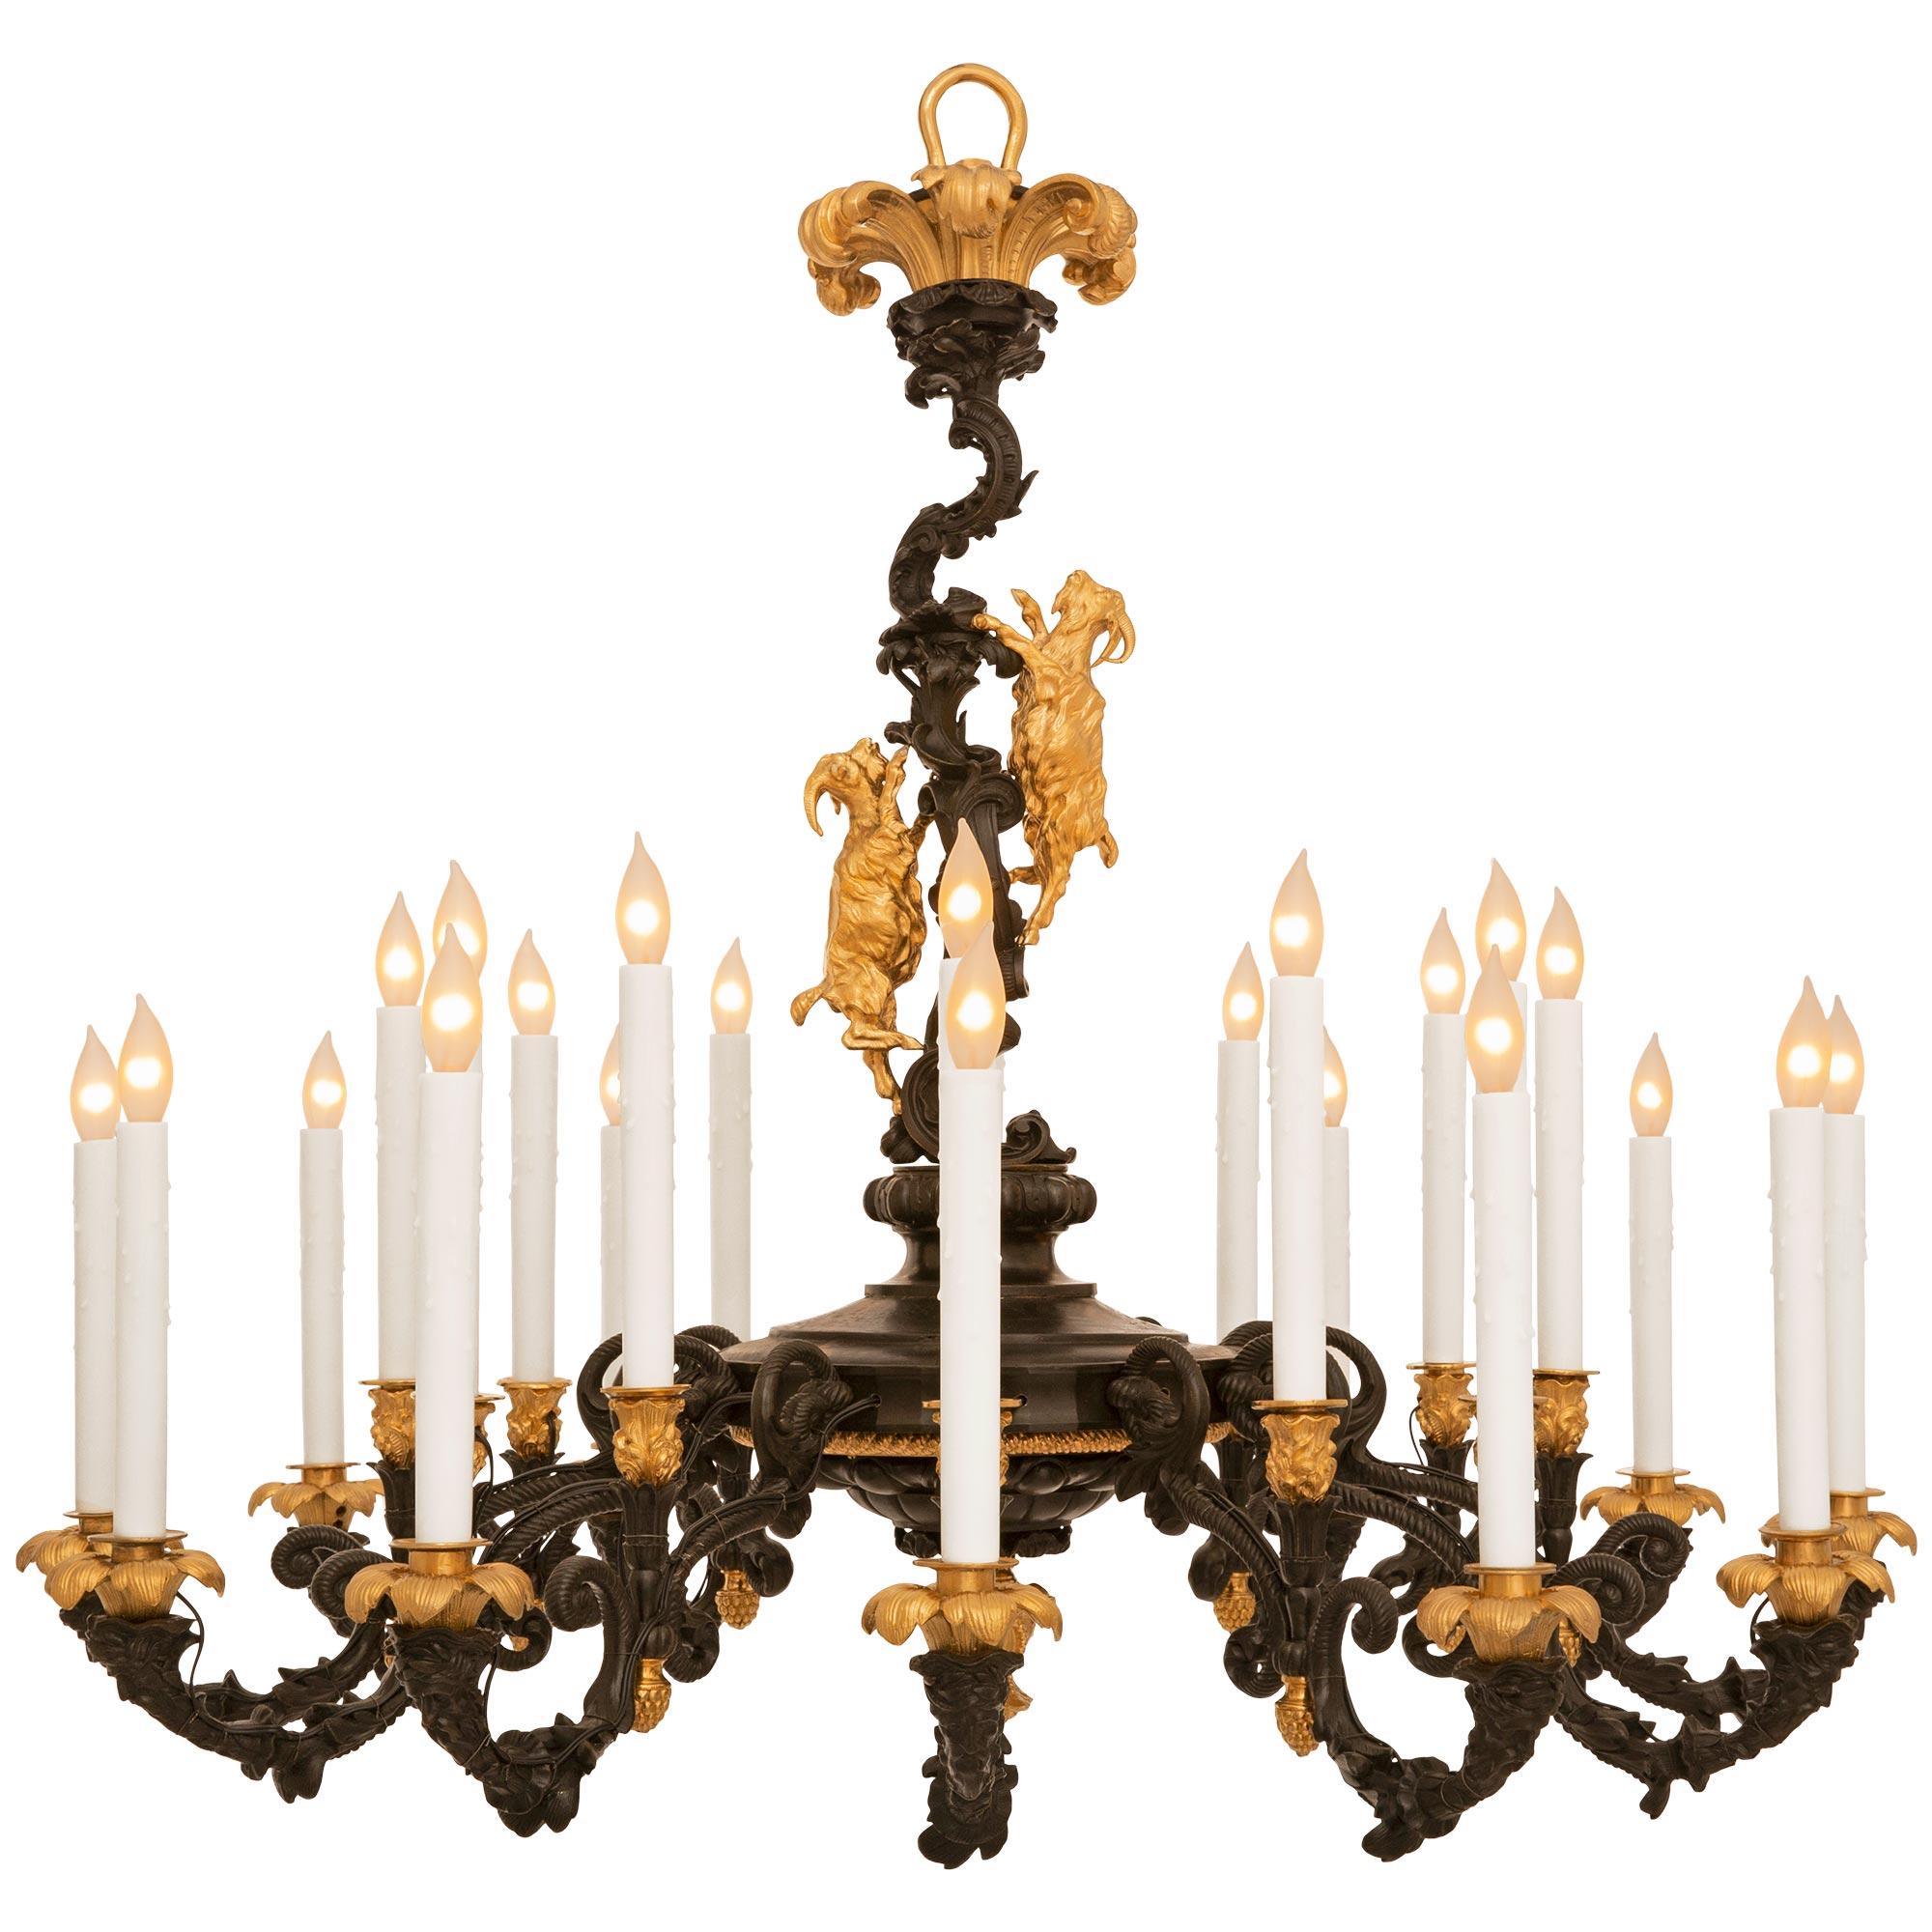 A stunning and most decorative French 19th century Louis XV st. patinated Bronze and Ormolu chandelier. This exquisite twelve arm twenty four light chandelier is centered around an Ormolu berried foliate bottom finial. Above the bottom finial is a